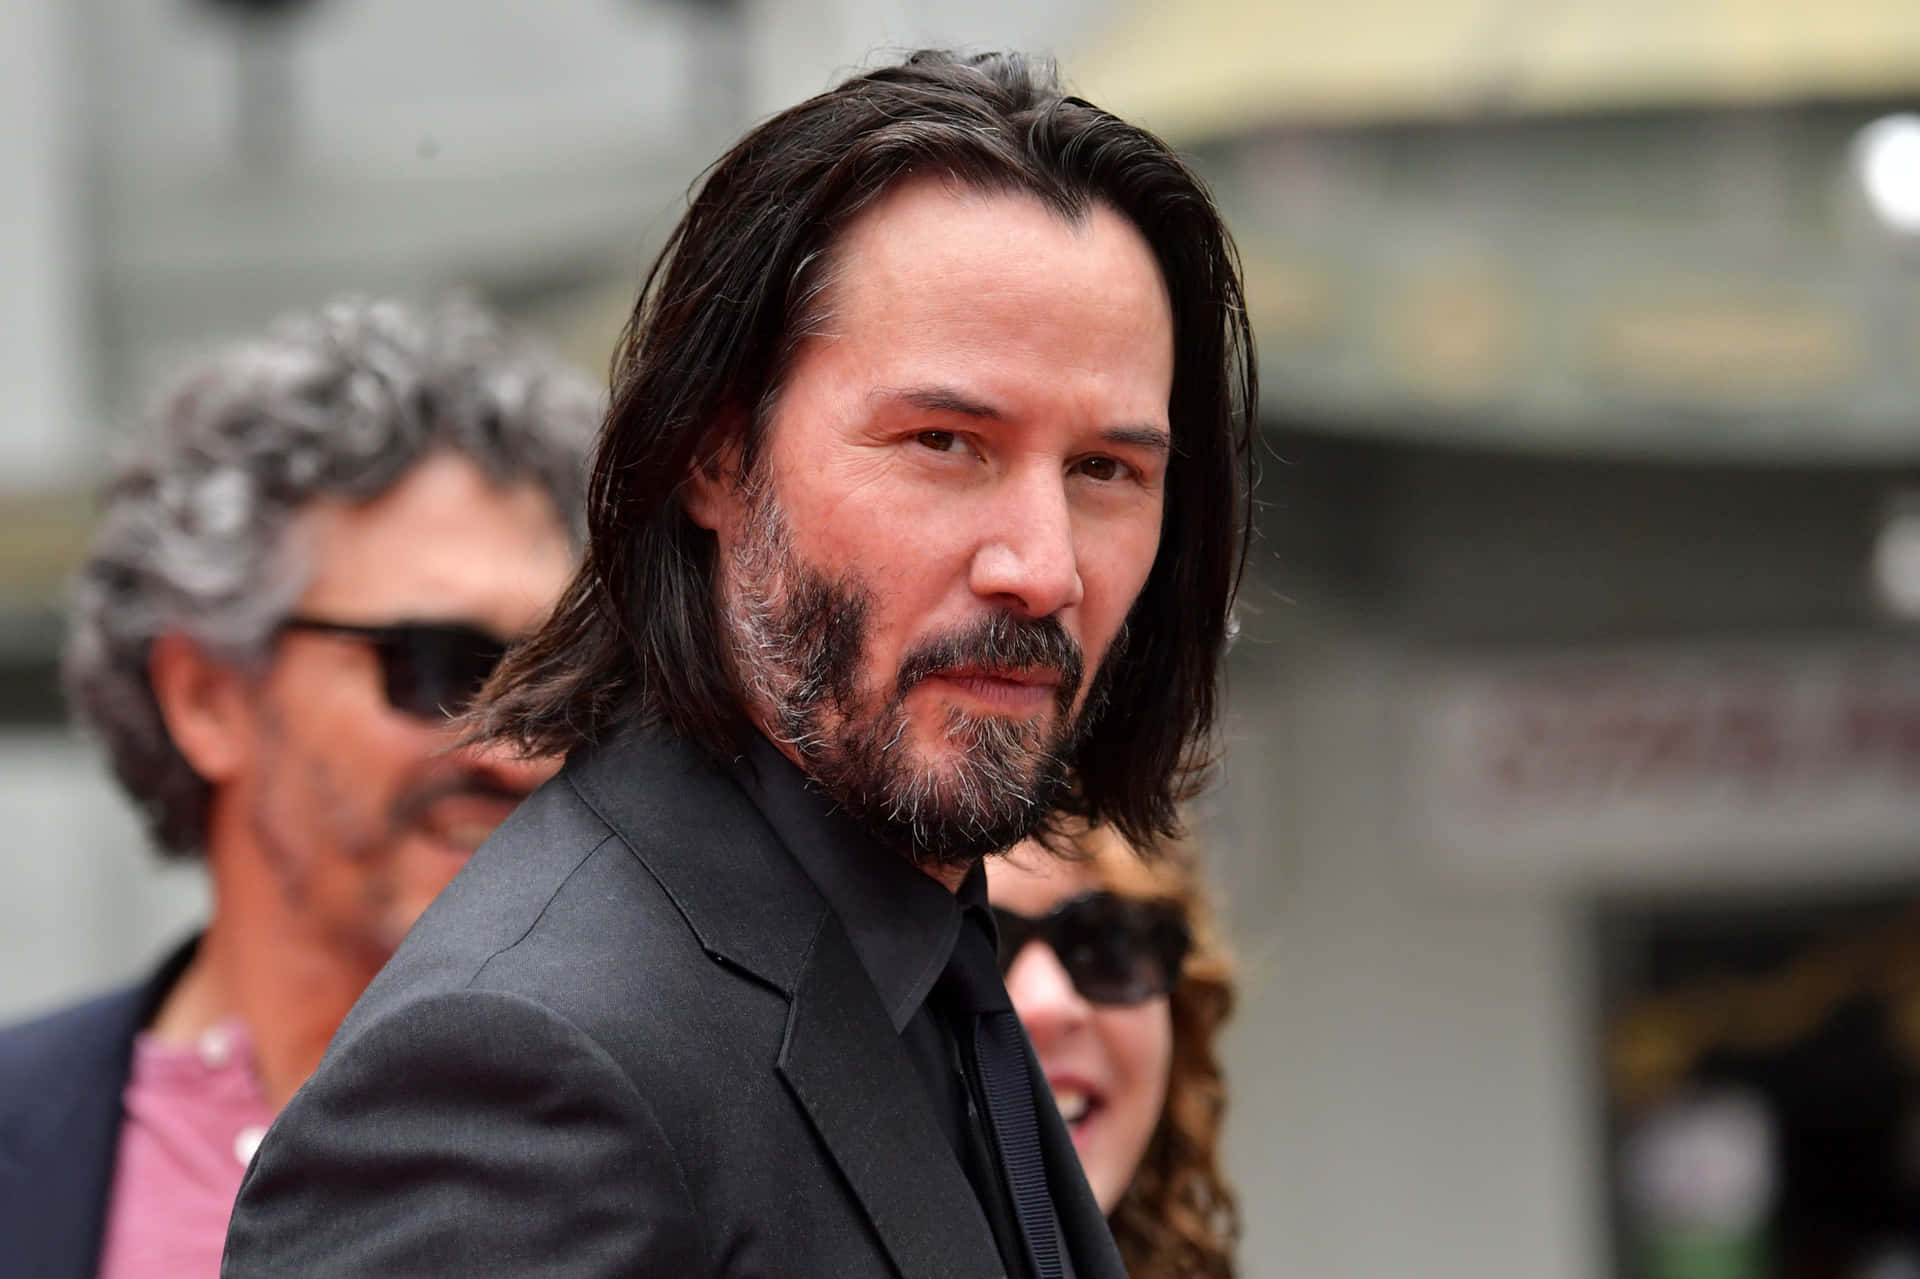 Keanu Reeves Is A Man With Long Hair